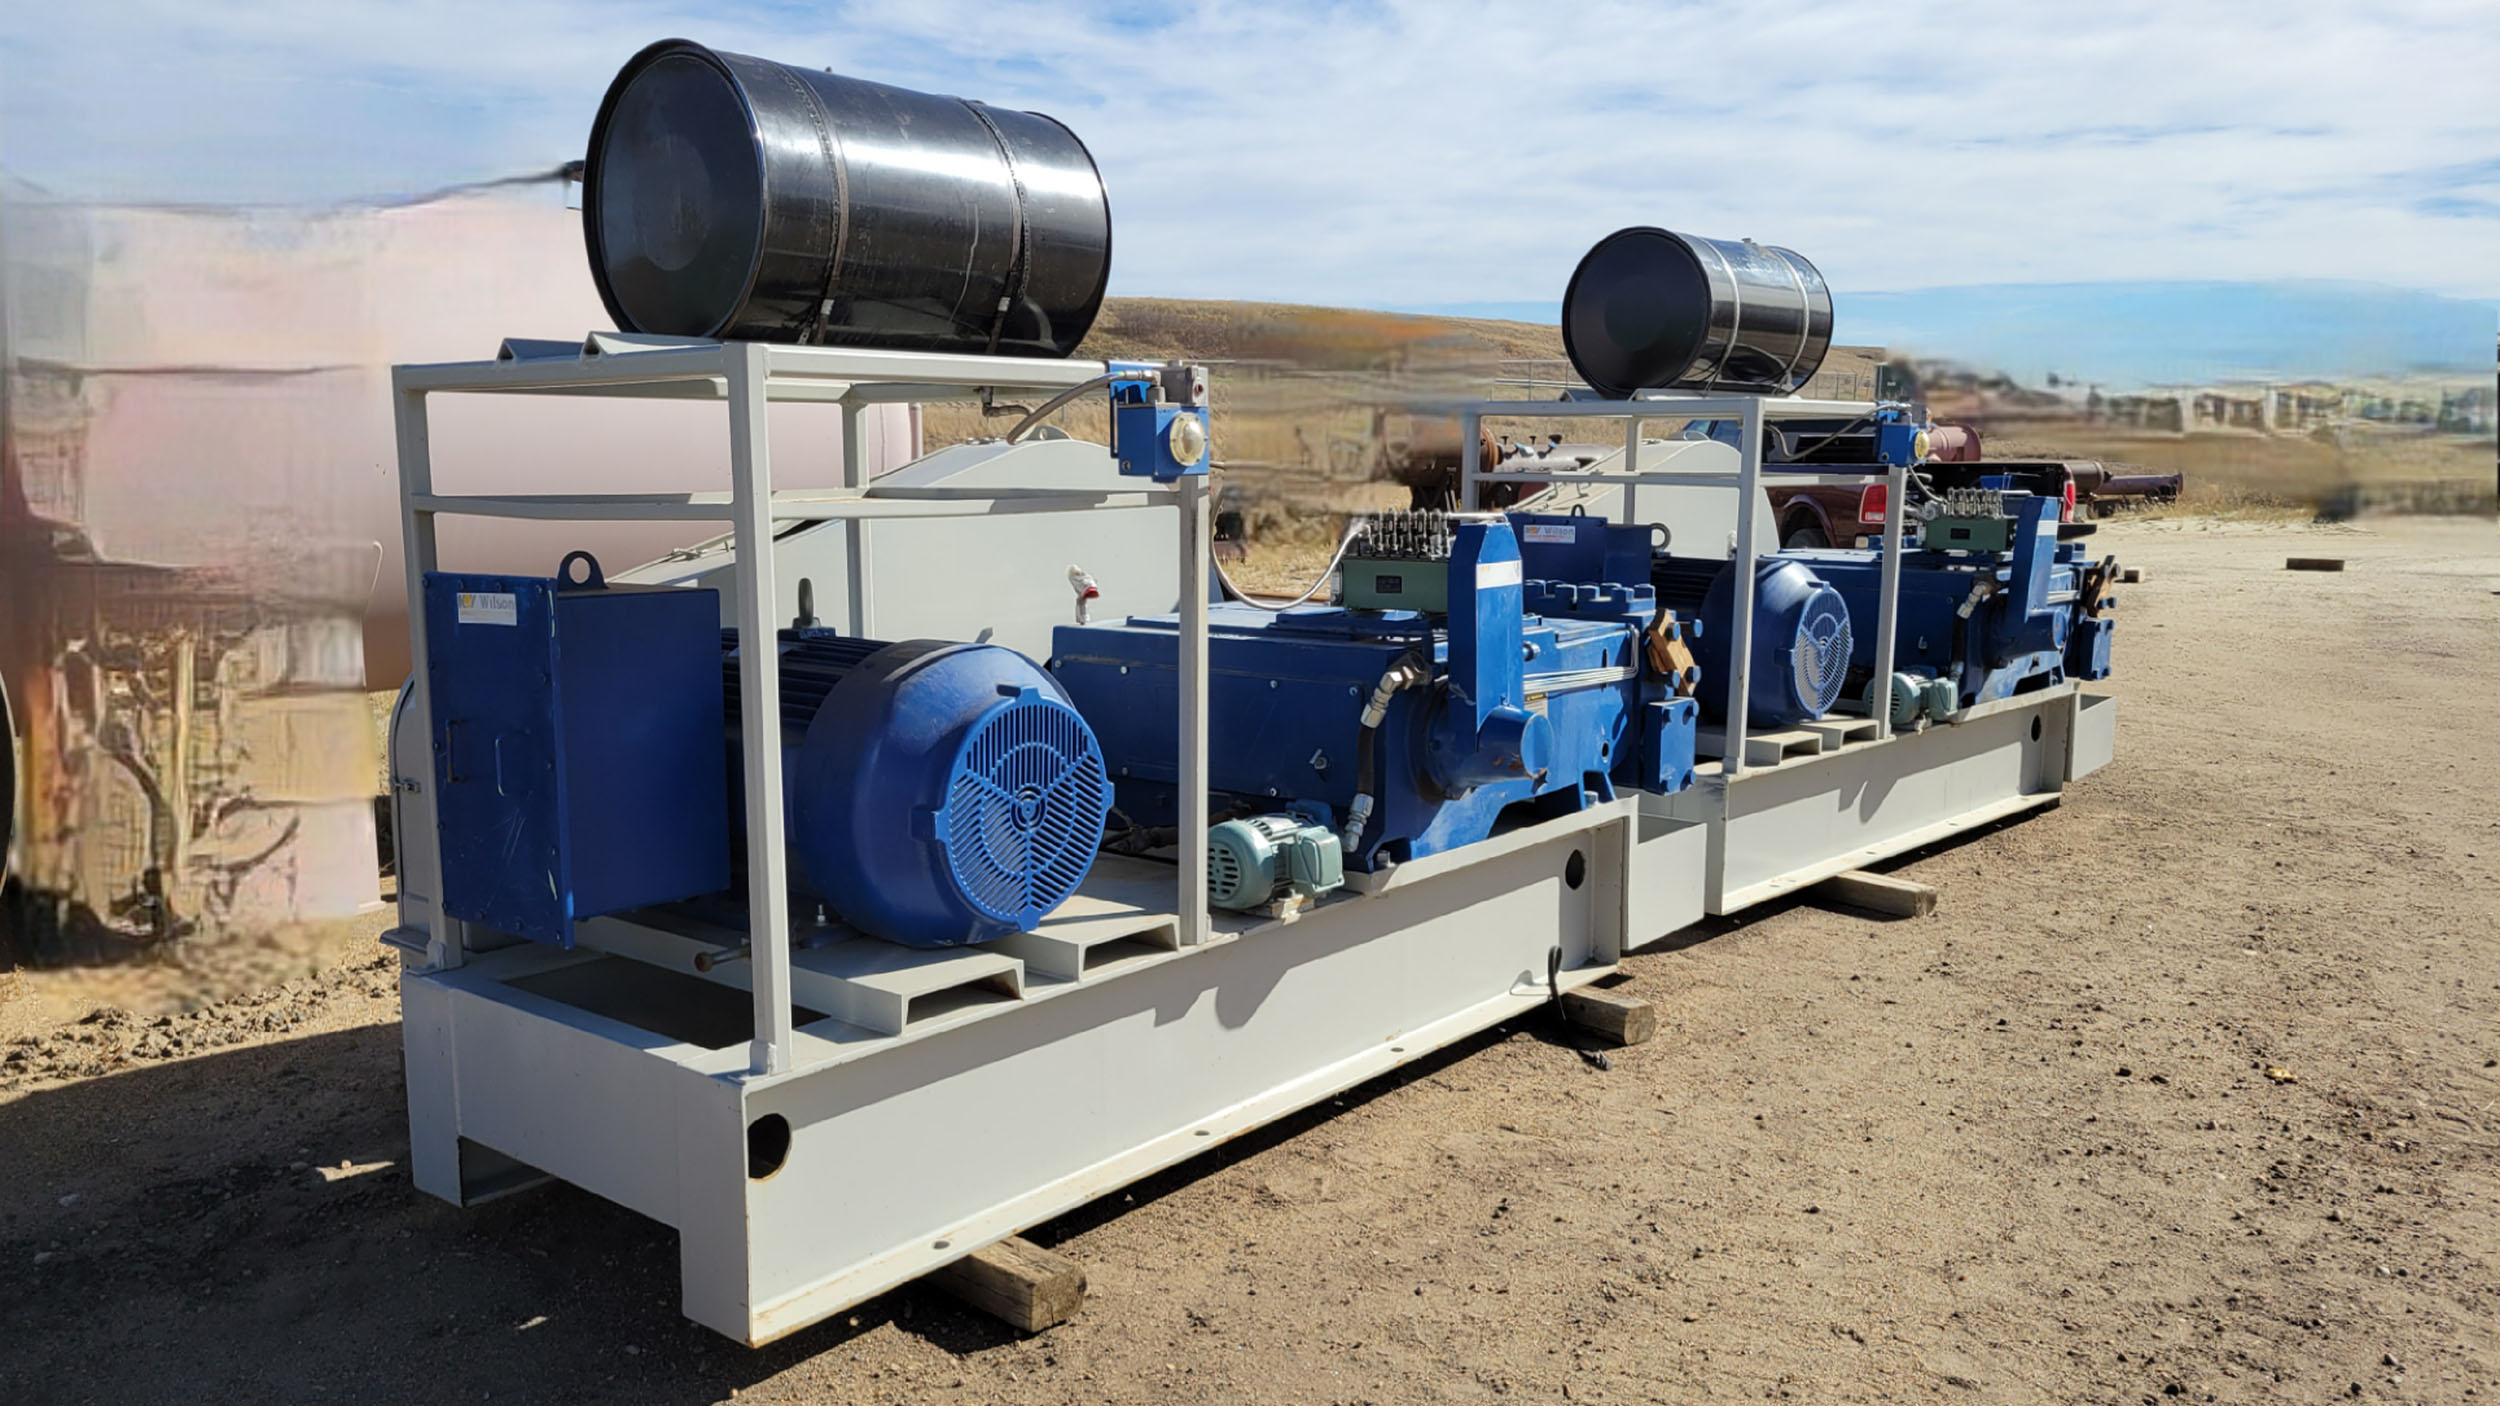 New / Never-used 300HP National 300Q-5M Unitized / Mini Skid Pumps for sale in Alberta Canada surplus oilfield oil and gas equipment 5